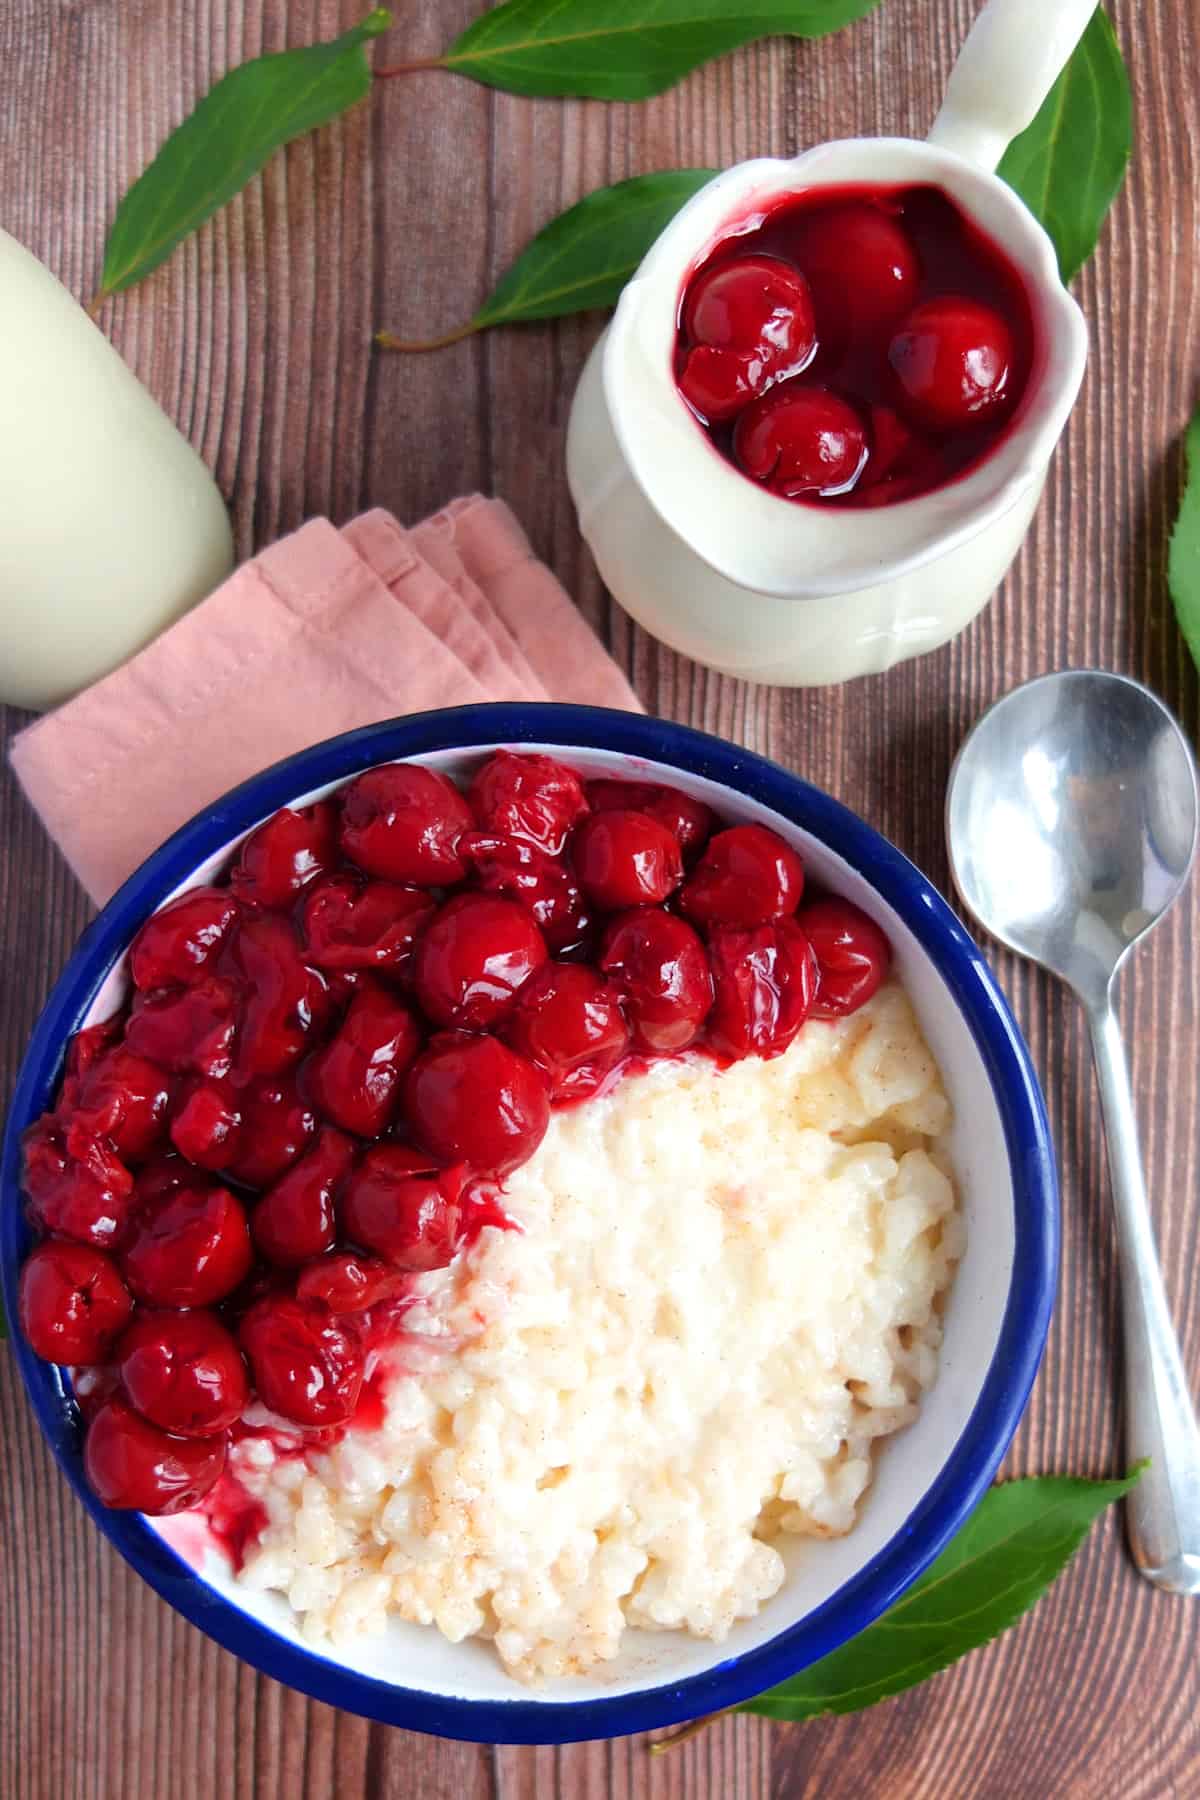 A white bowl with a blue rim. In it is German milchreis. Half of the rice is topped with some cherries. Above the bowl is a little dessert cream can with cherries. Next to the bowl is a spoon. The bowl sits on a pink napkin which is placed on a wooden background.